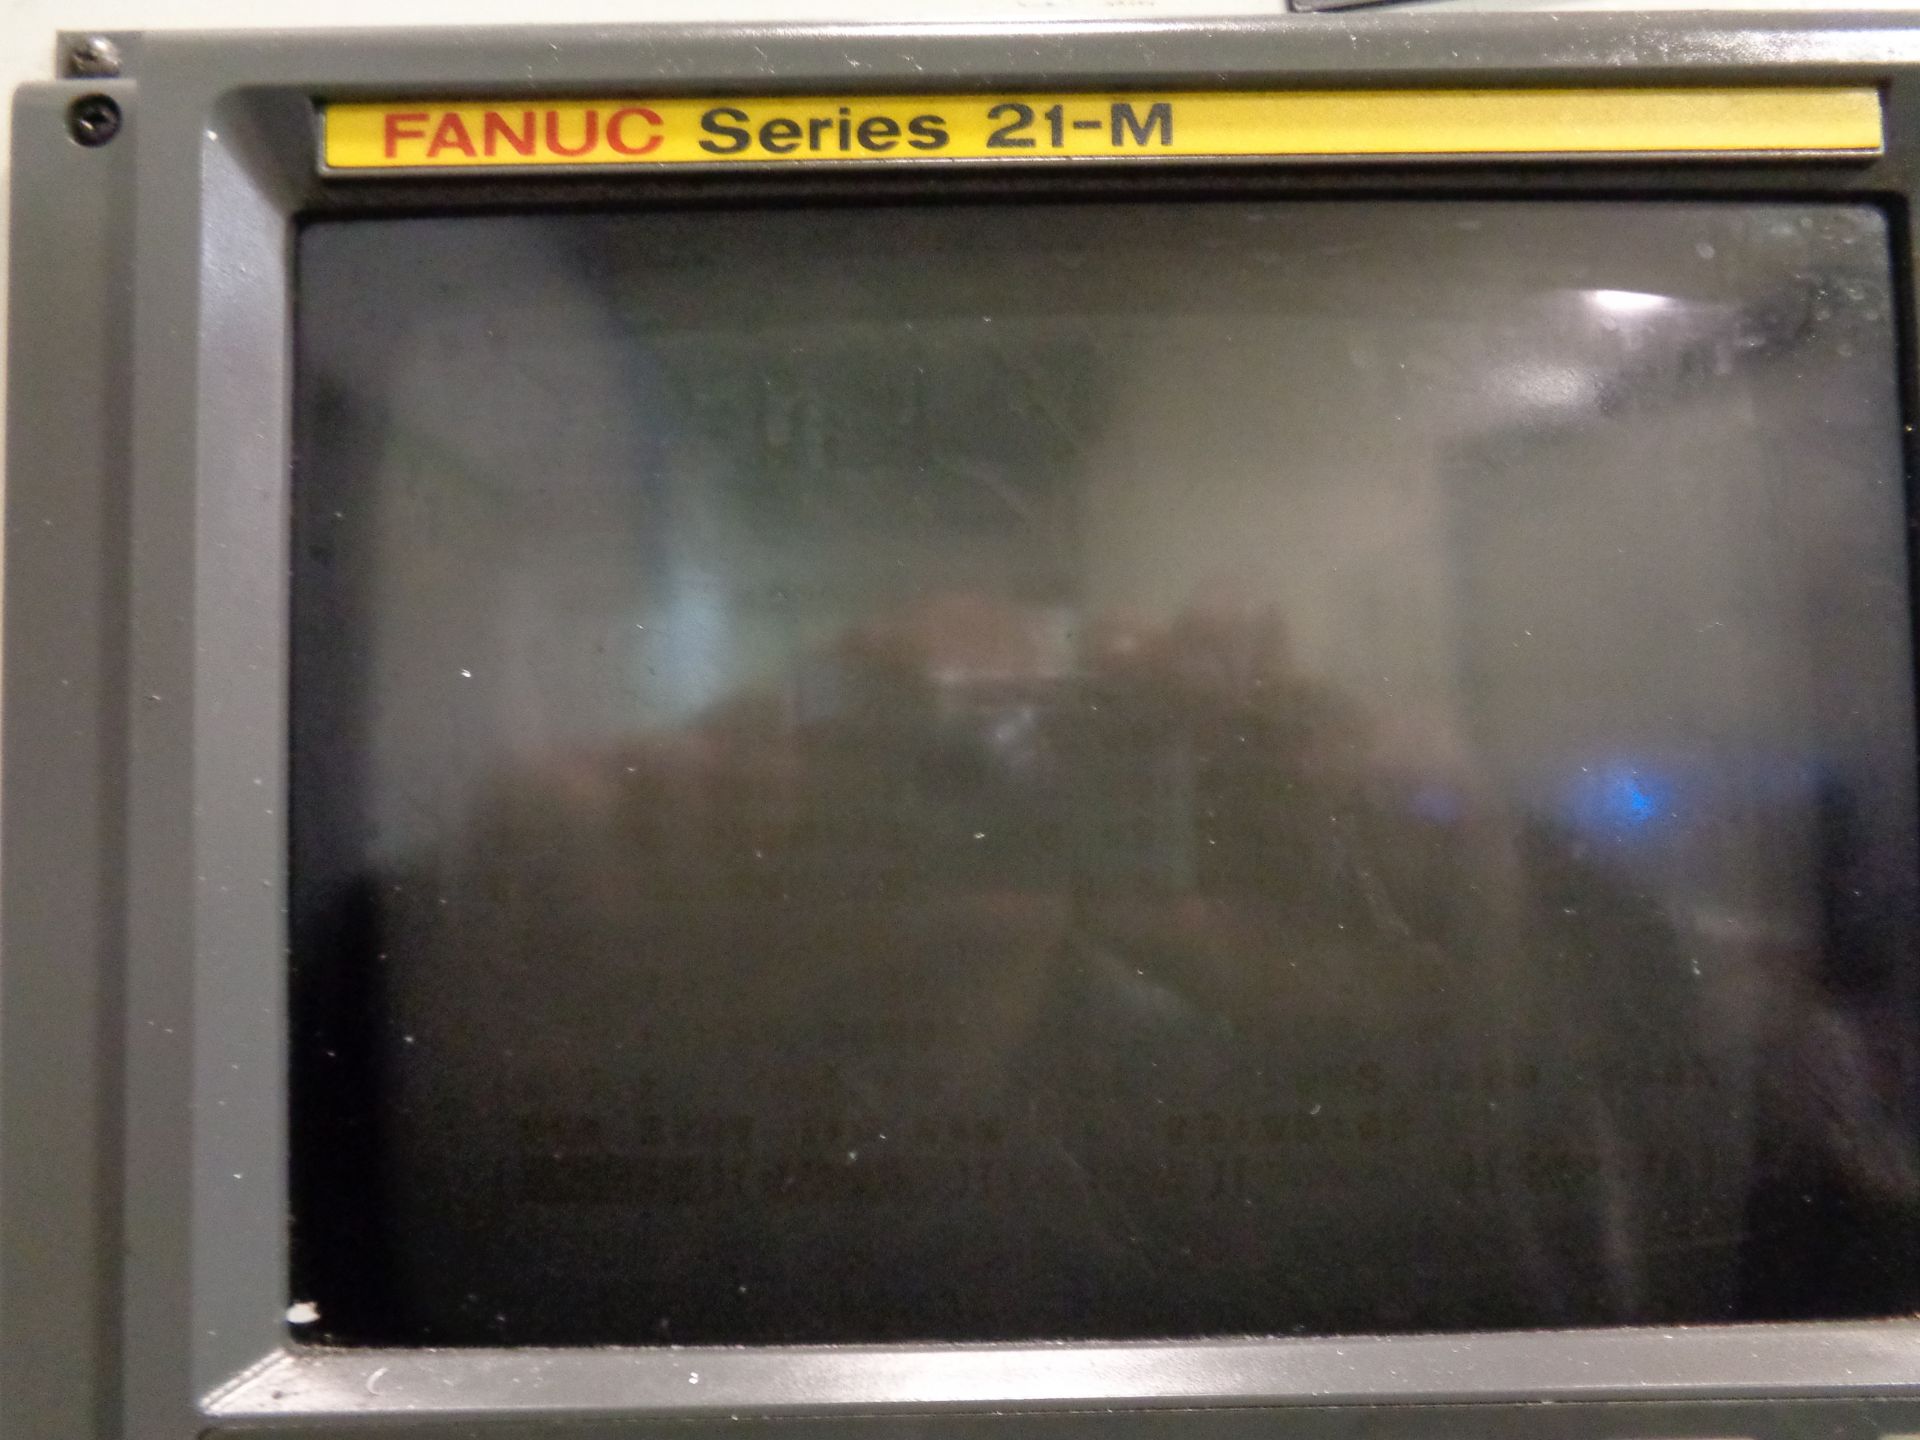 SAEILO Mach 4 Horizontal Cnc Machining Center - FANUC Control ( Being Sold Off Site ) - Image 11 of 14